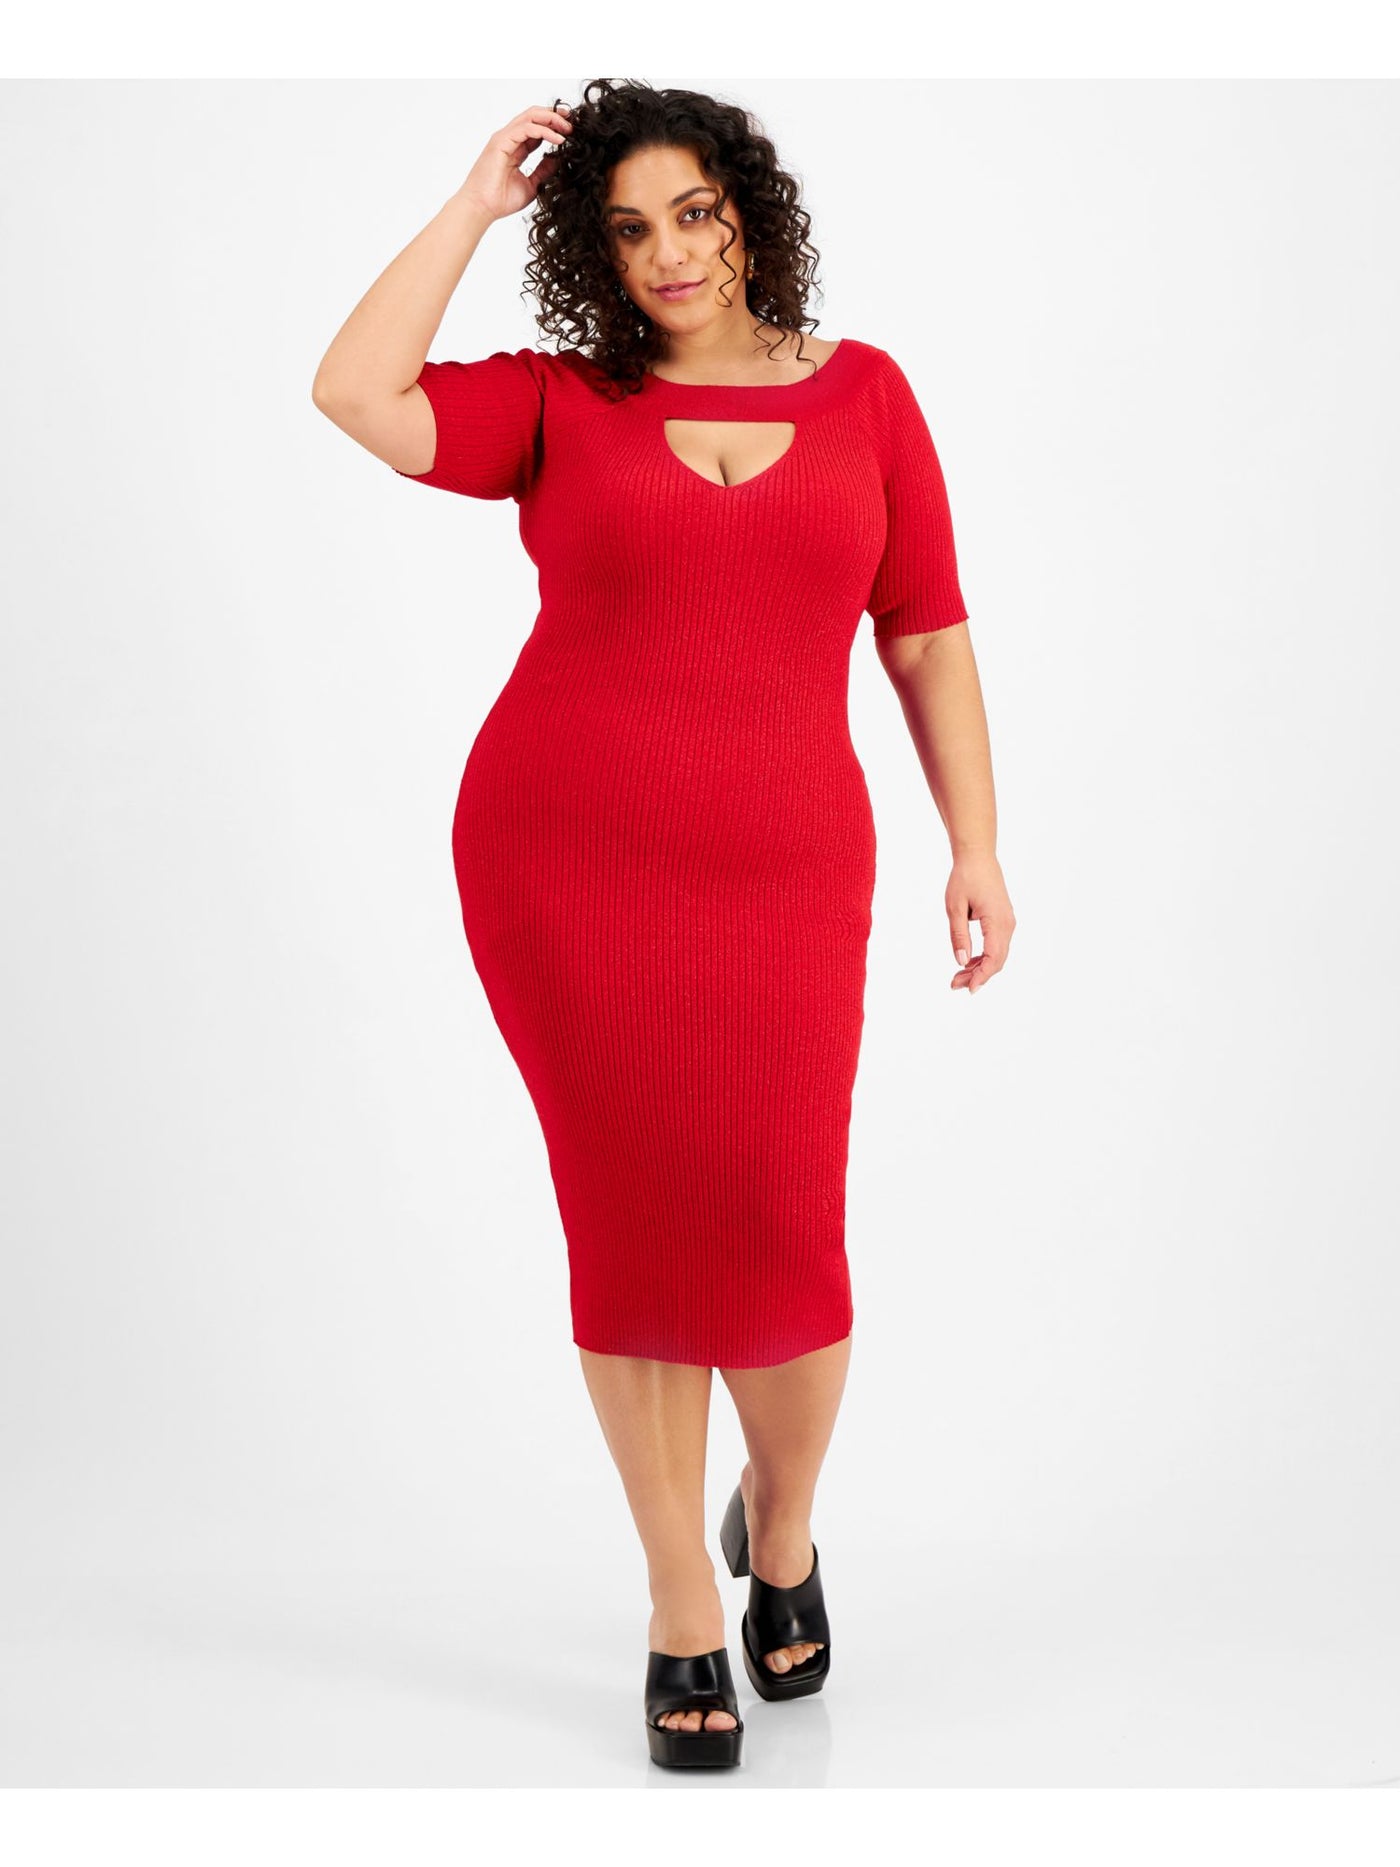 LOVE ALWAYS Womens Red Ribbed Cut Out Unlined Elbow Sleeve Round Neck Below The Knee Party Sweater Dress Plus 1X